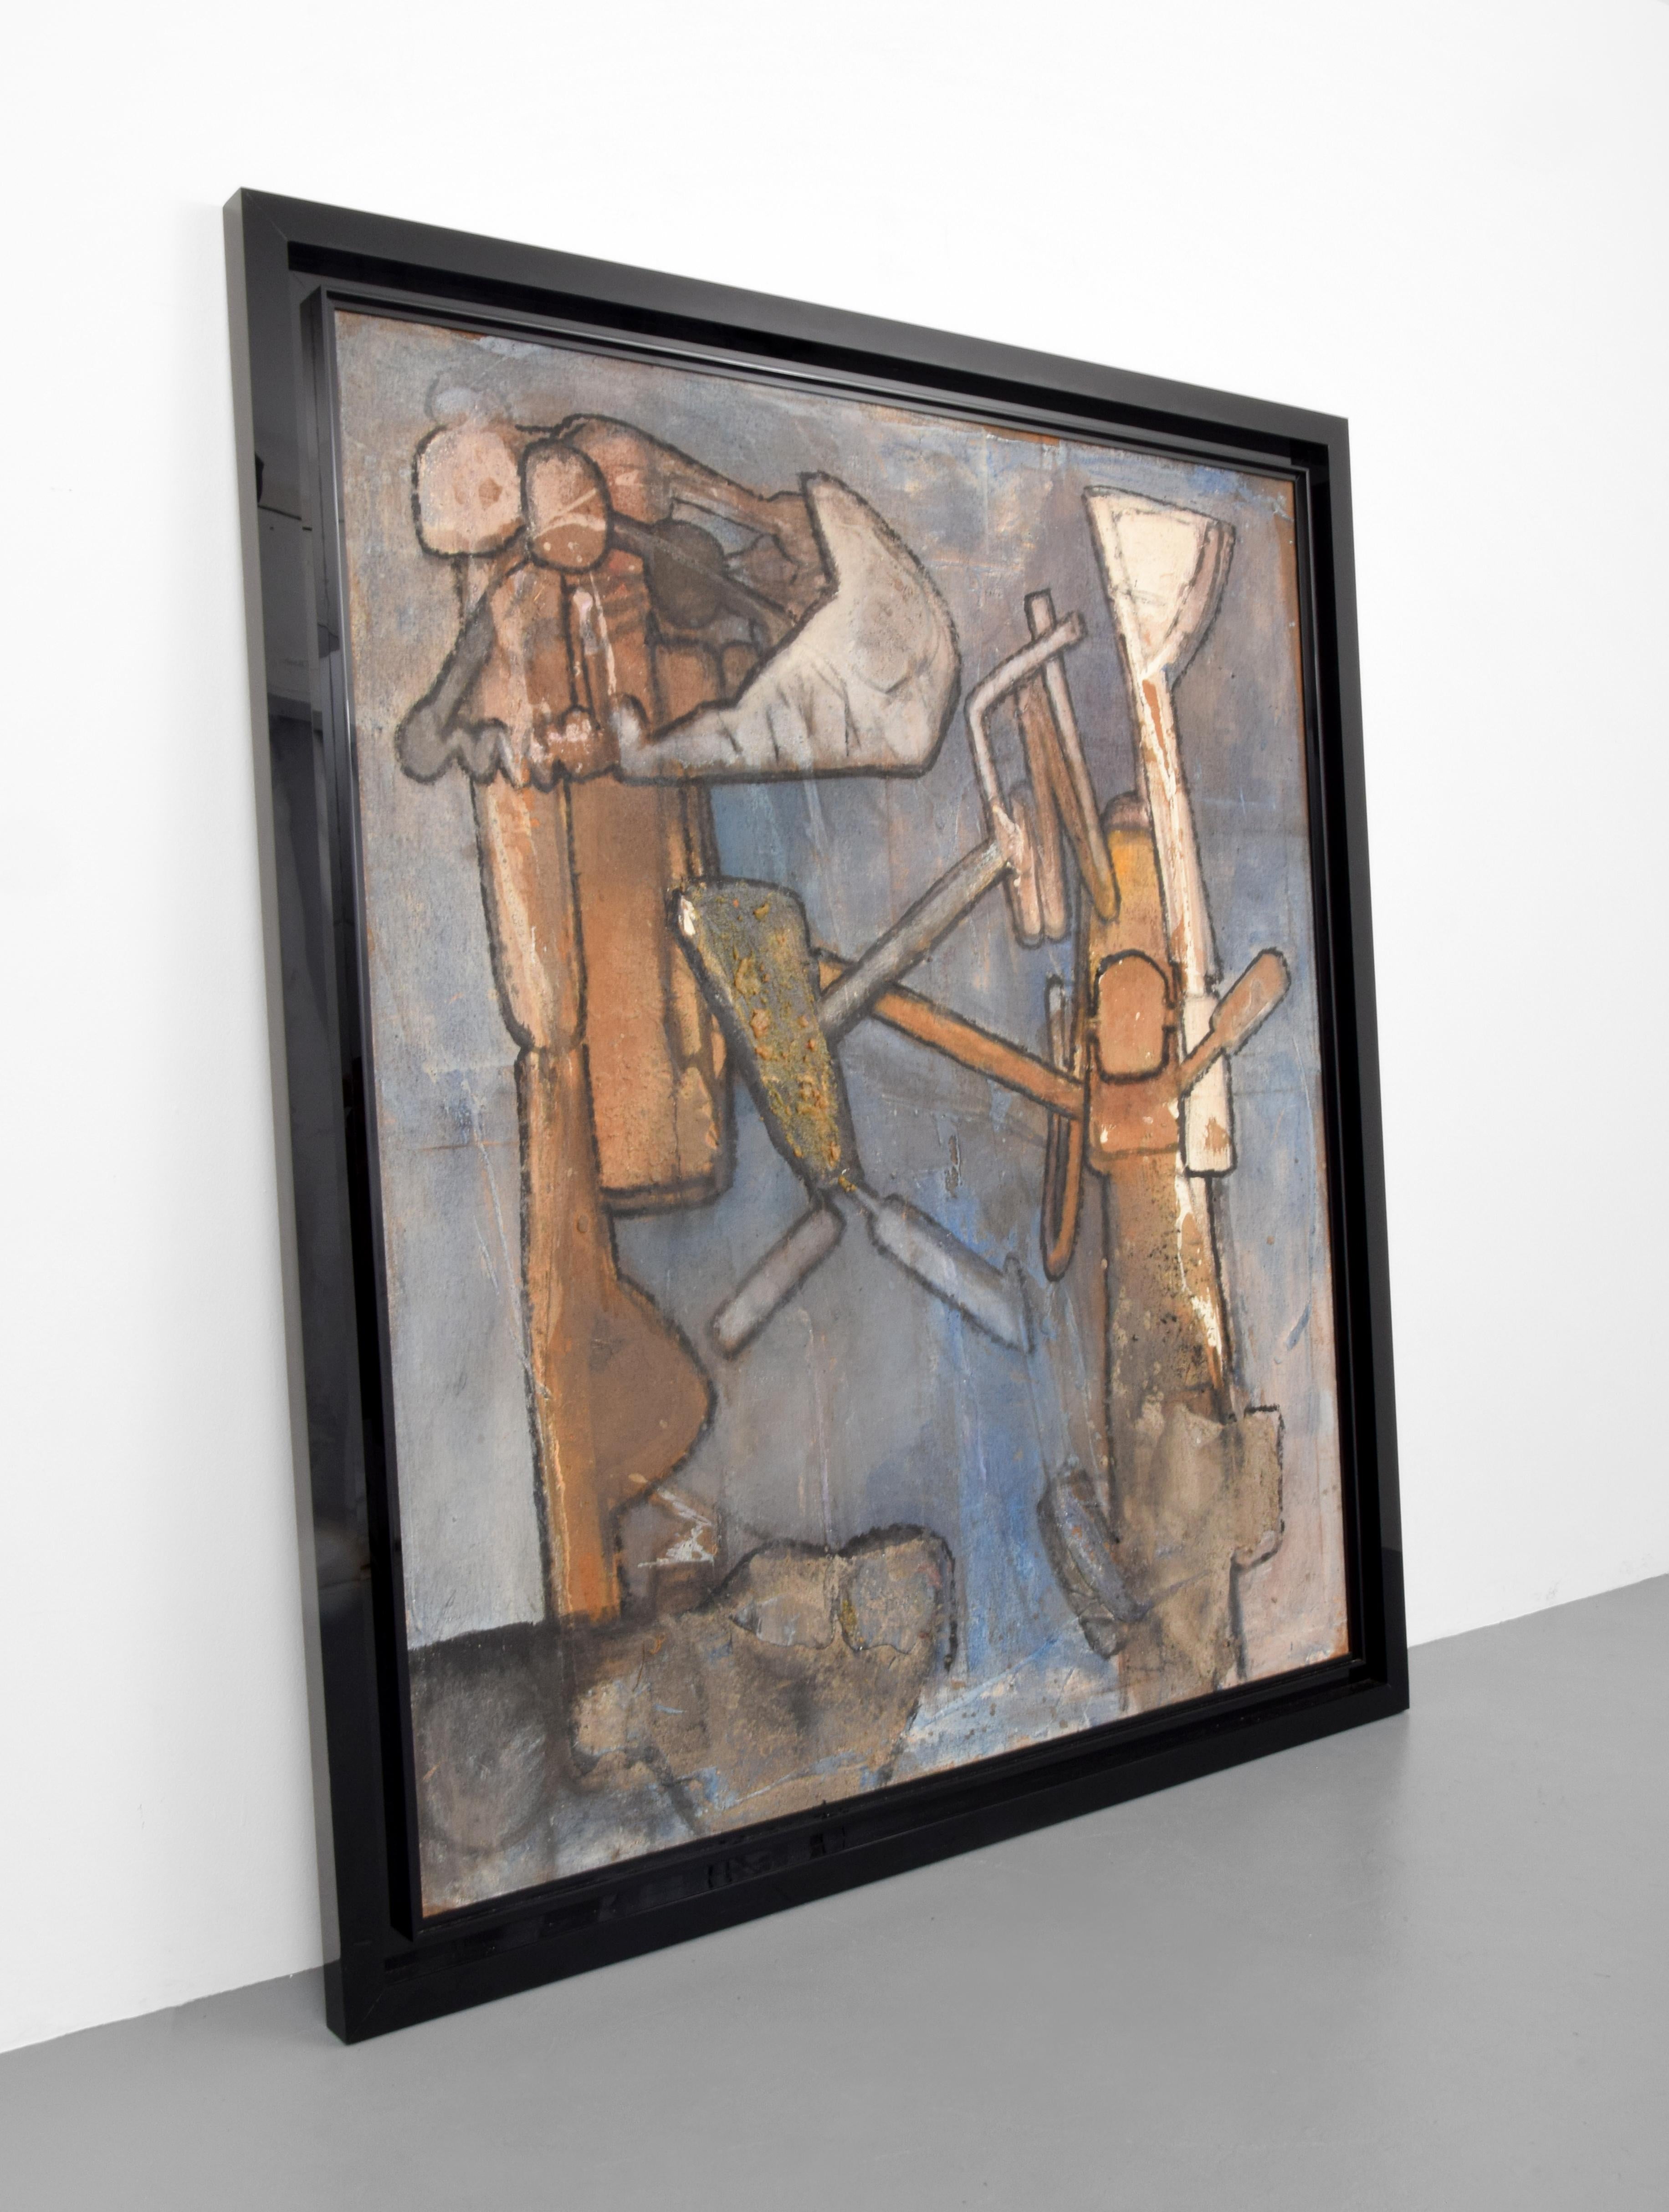 Large painting by Roberto Matta (1911-2002). We would like to thank Richard Gray Gallery for their kind assistance in documenting provenance for this work. Work is accompanied by a copy of the sales receipt issued by Hokin Gallery, 4.15.1970 to Dr.